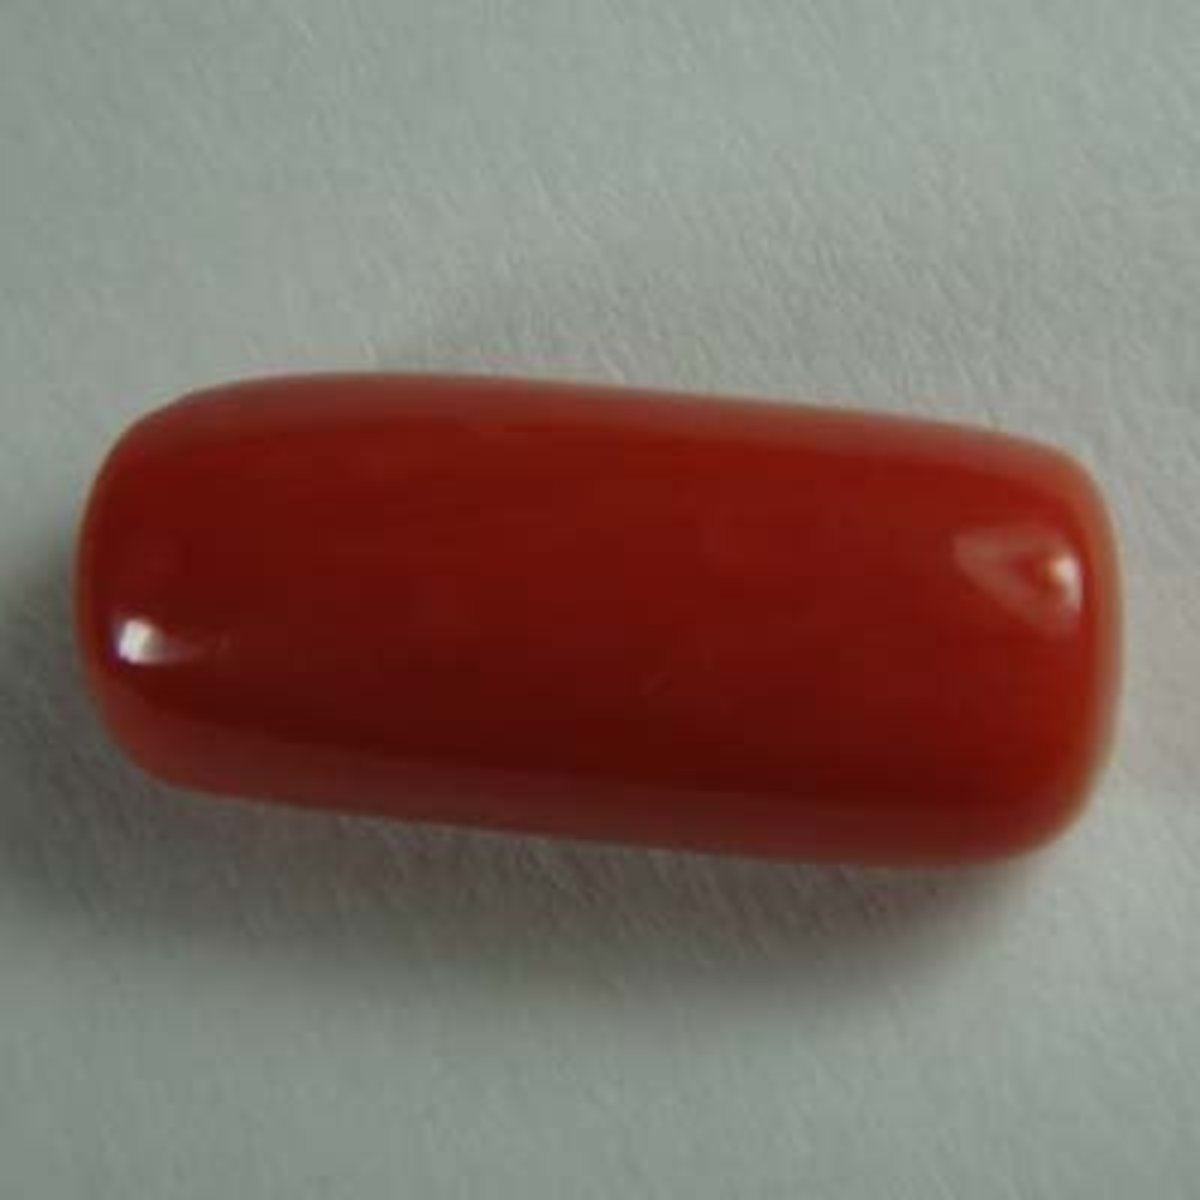 Red coral is one of the five sacred stones of the Tibetans and Native Americans.